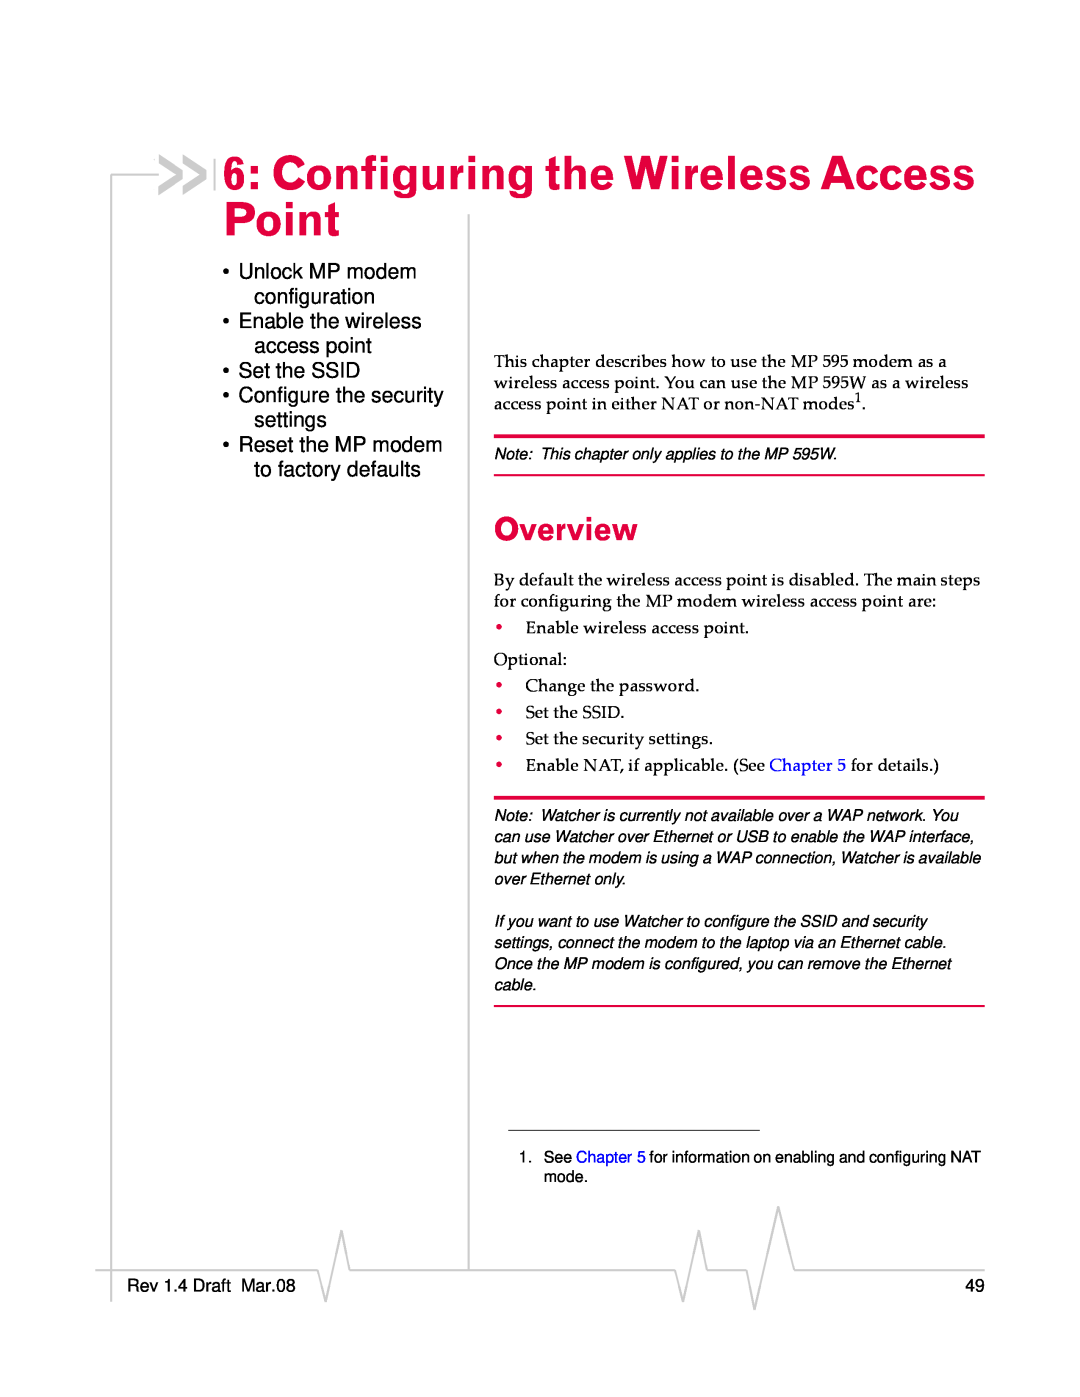 Sierra Wireless MP595W manual Configuring the Wireless Access Point, Overview 